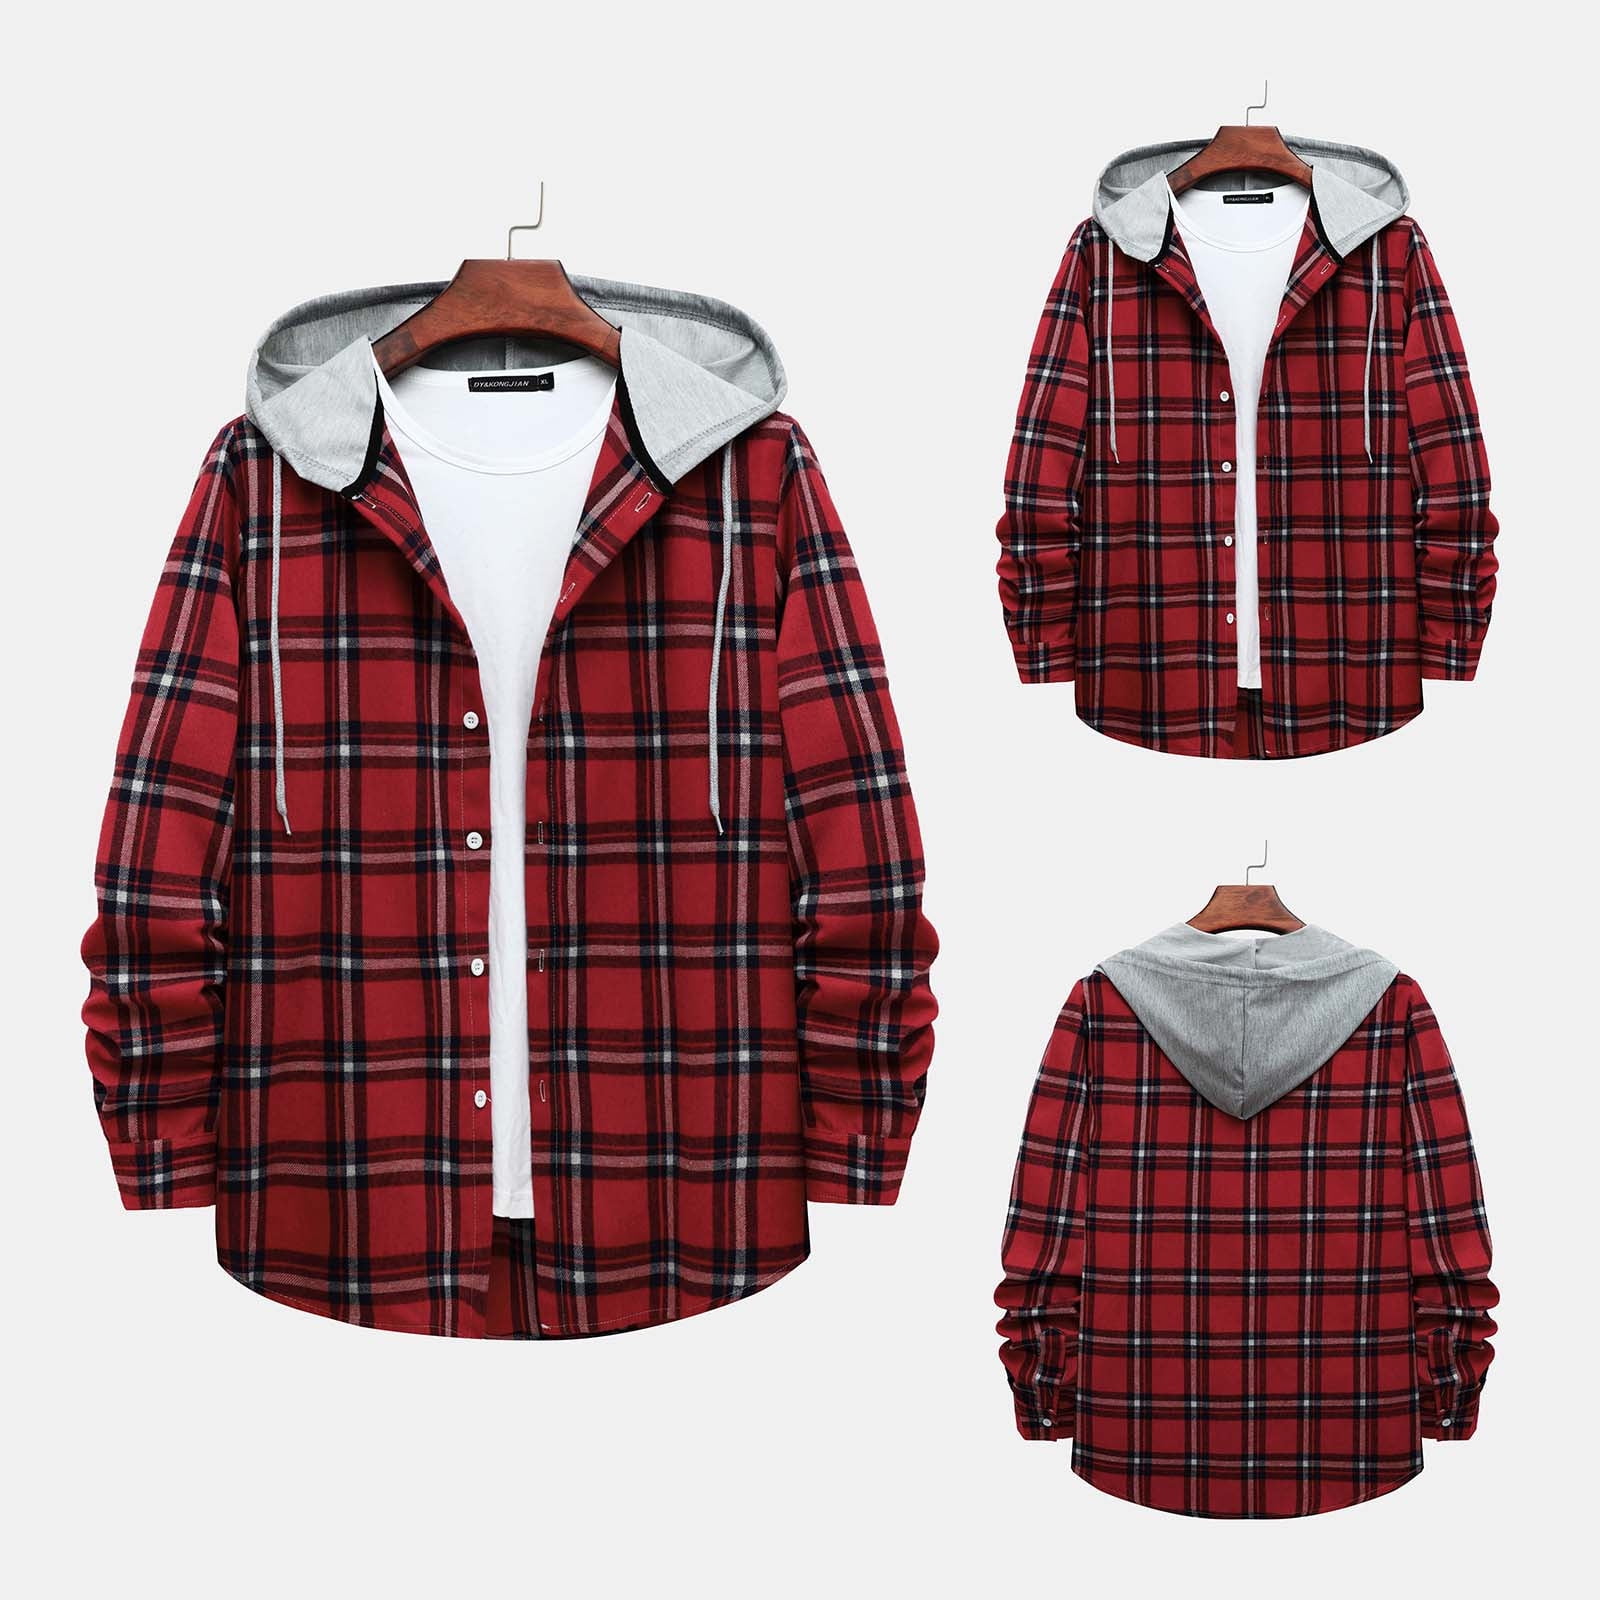 ZCFZJW Mens Classic Plaid Long Sleeve Hooded Shirts Casual Thin Cotton  Light Jacket Relaxed Fit Loose Outwear Hoodies Shirt Red S